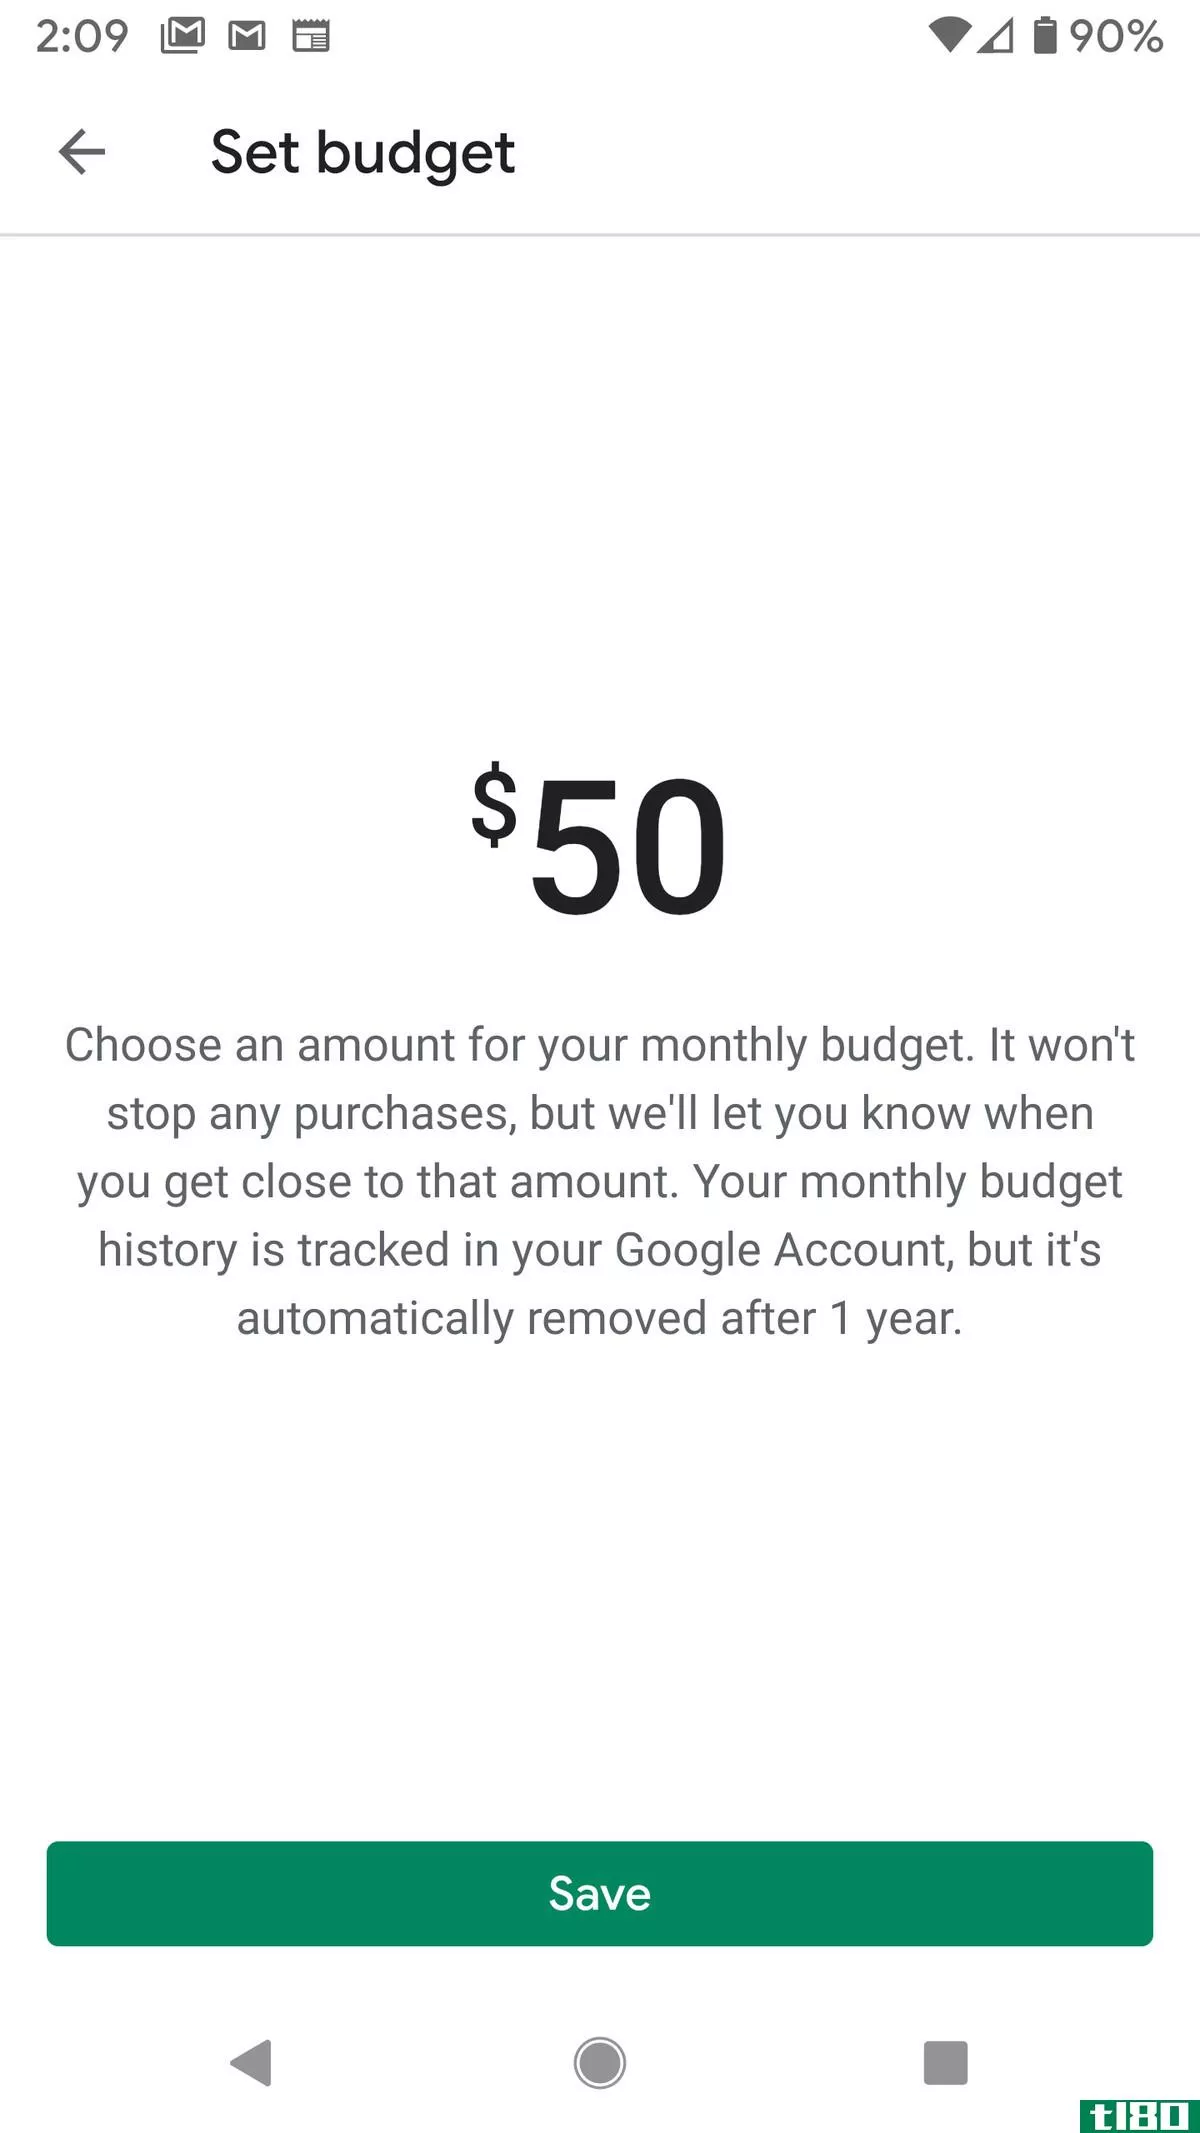 Choose an amount for your budget